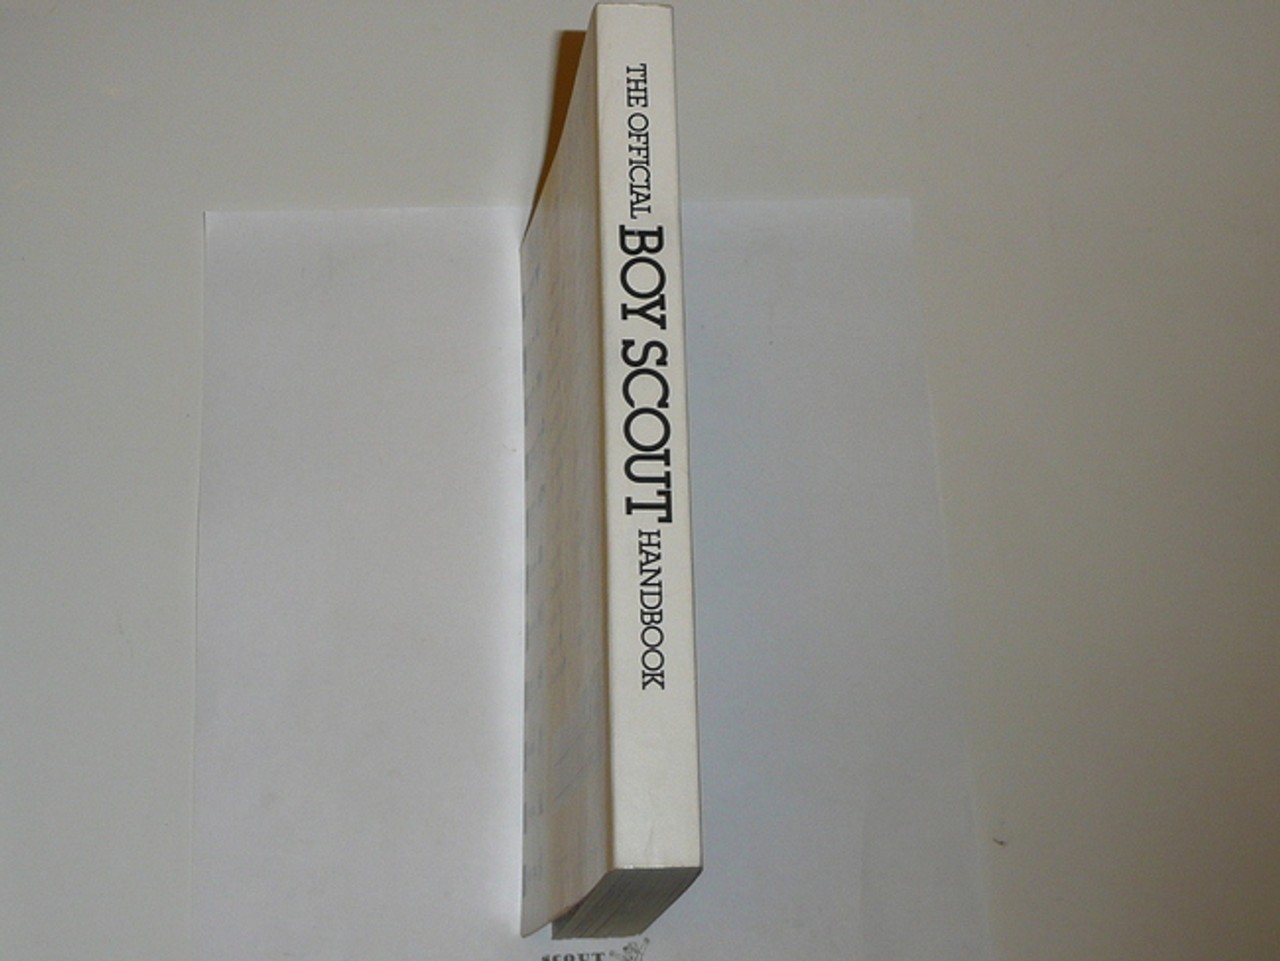 1979 Boy Scout Handbook, Ninth Edition, First Printing, Litely used condition, Last Norman Rockwell Cover, name on cover or side